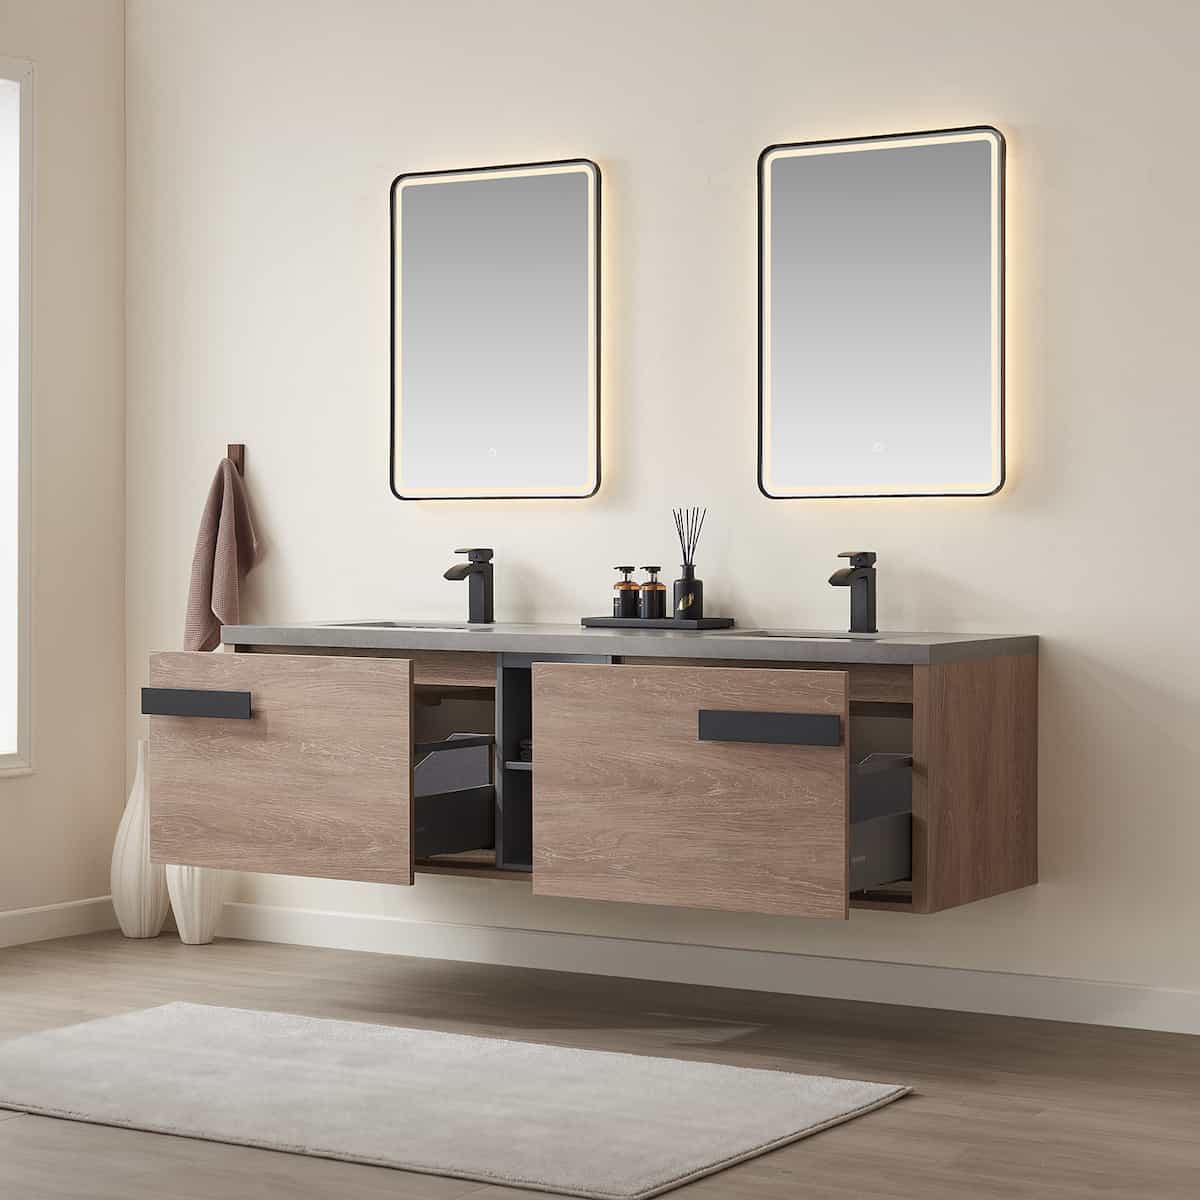 Vinnova Carcastillo 72 Inch Wall Mount Double Sink Bath Vanity in North American Oak with Grey Sintered Stone Top With Mirrors Drawers 703272-NO-WK #mirror_with mirror